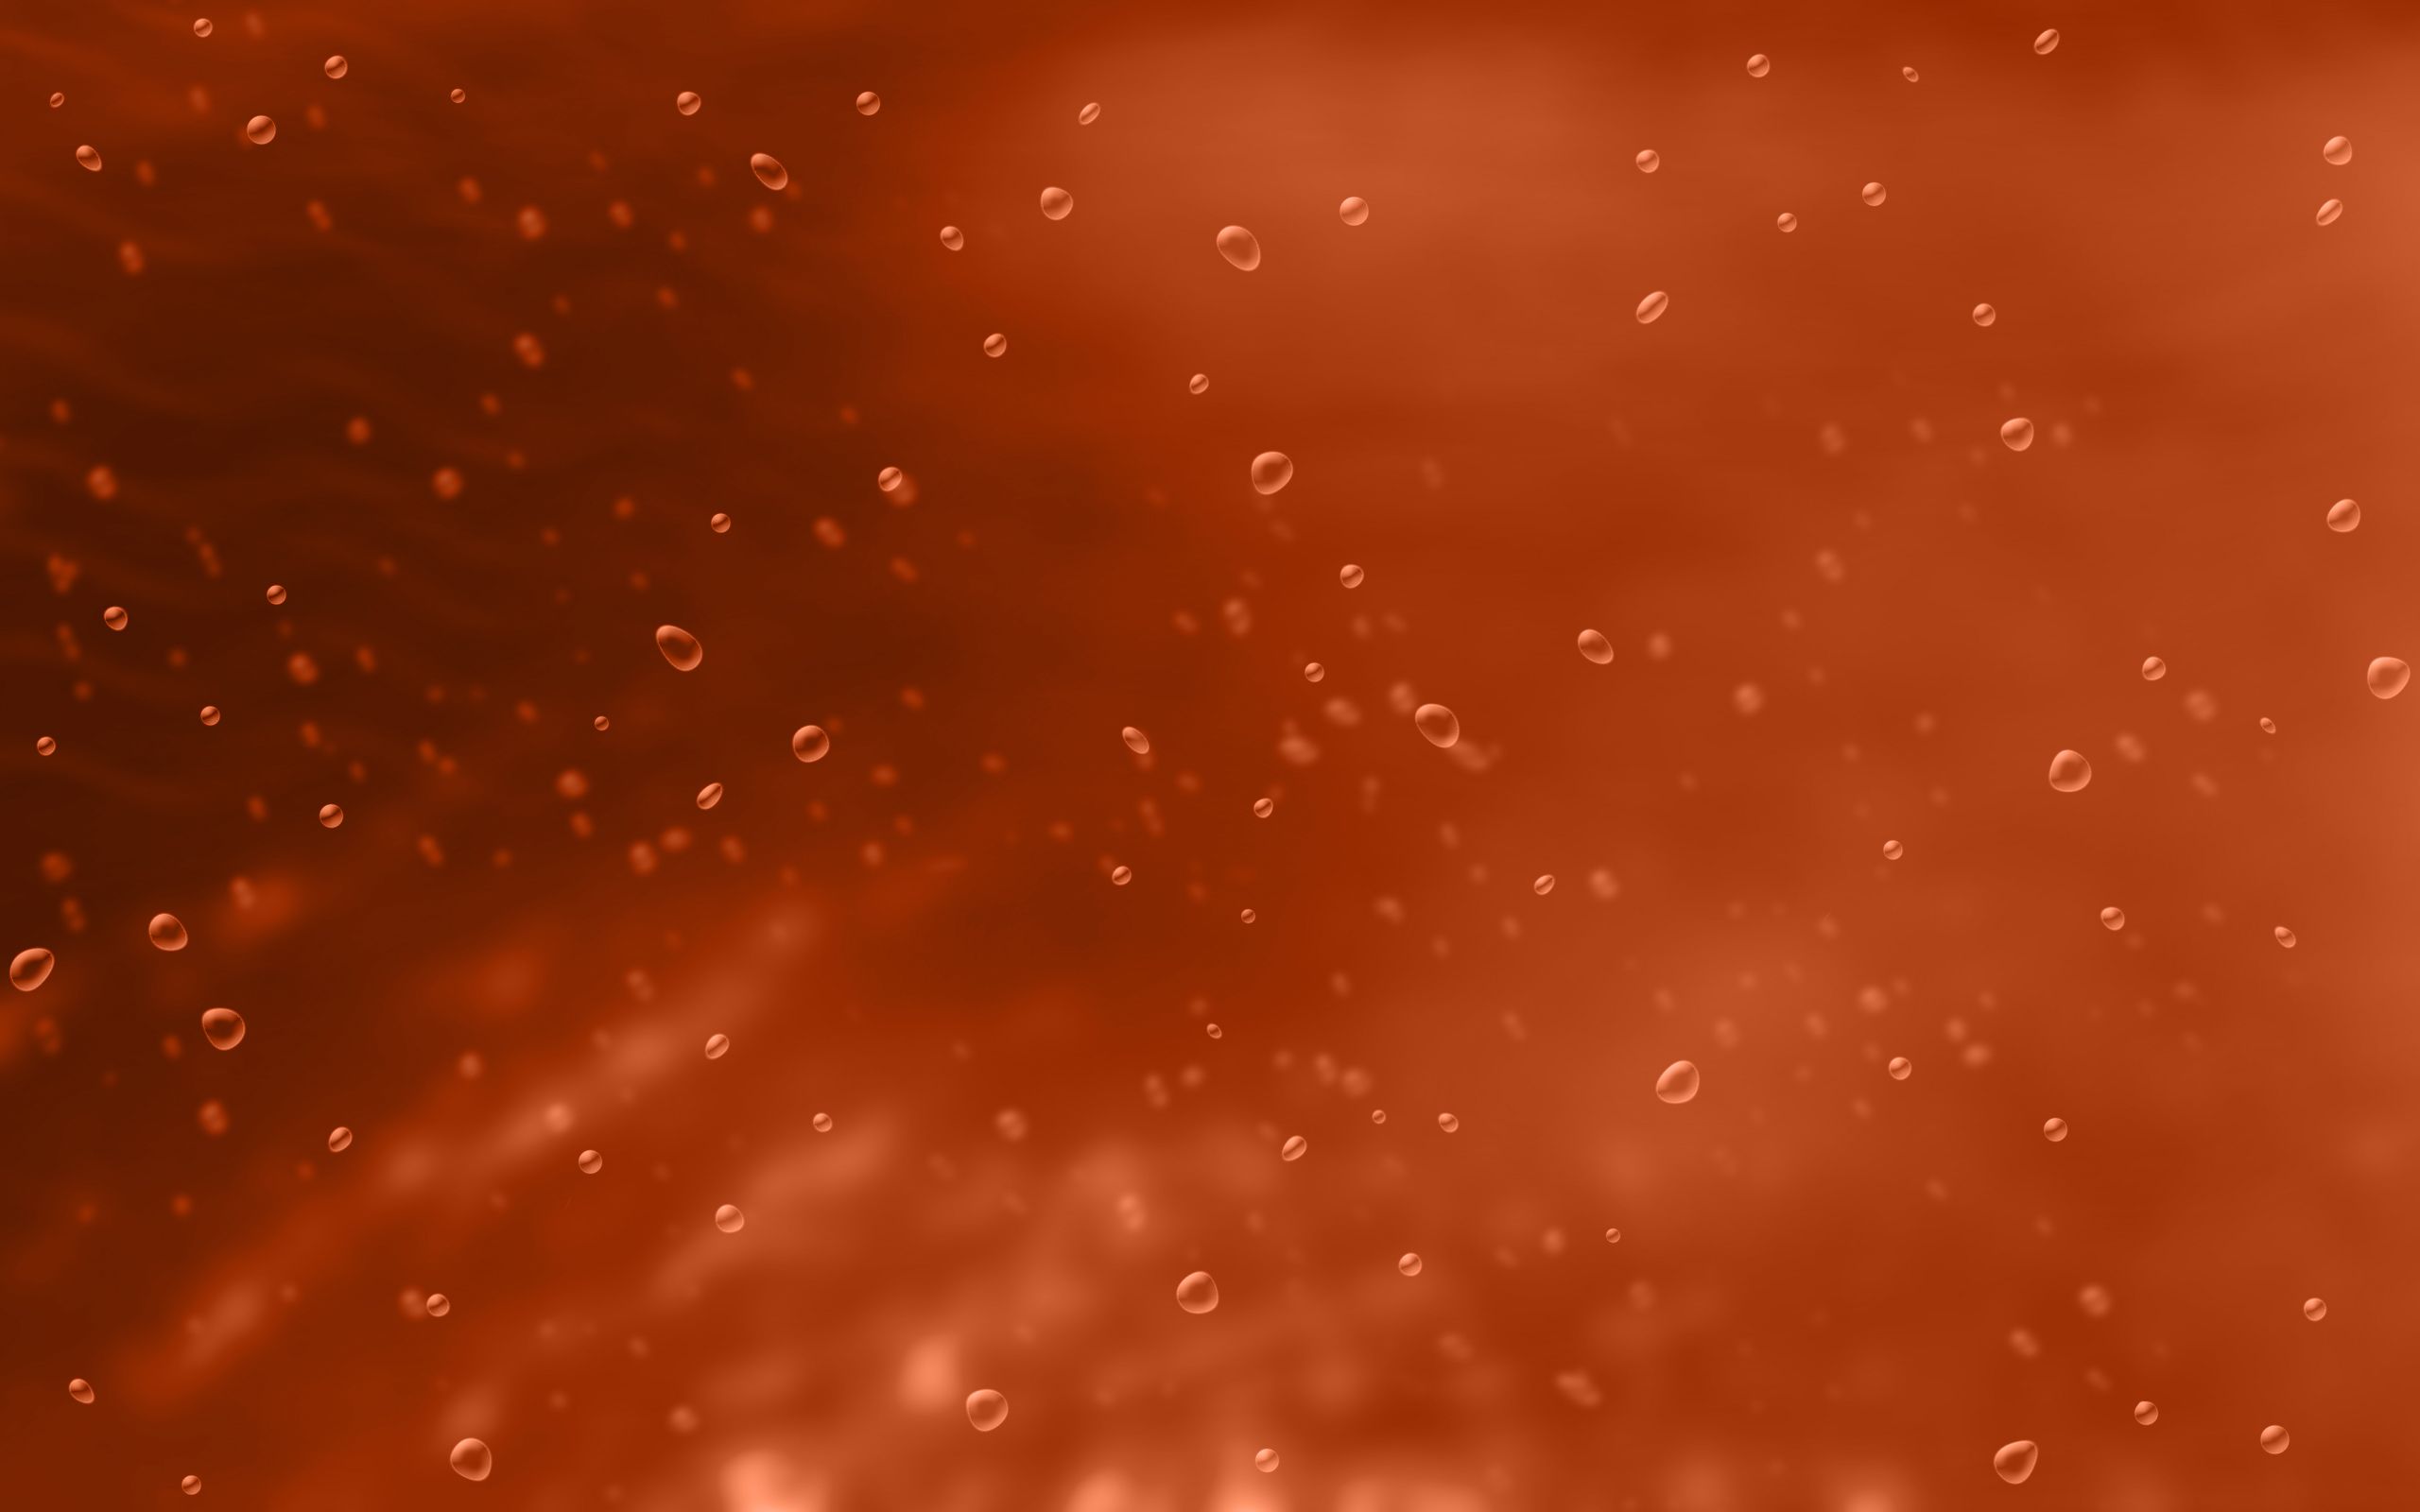 Full HD Wallpapers + Backgrounds, Red, Bubbles, by Kevin Harris